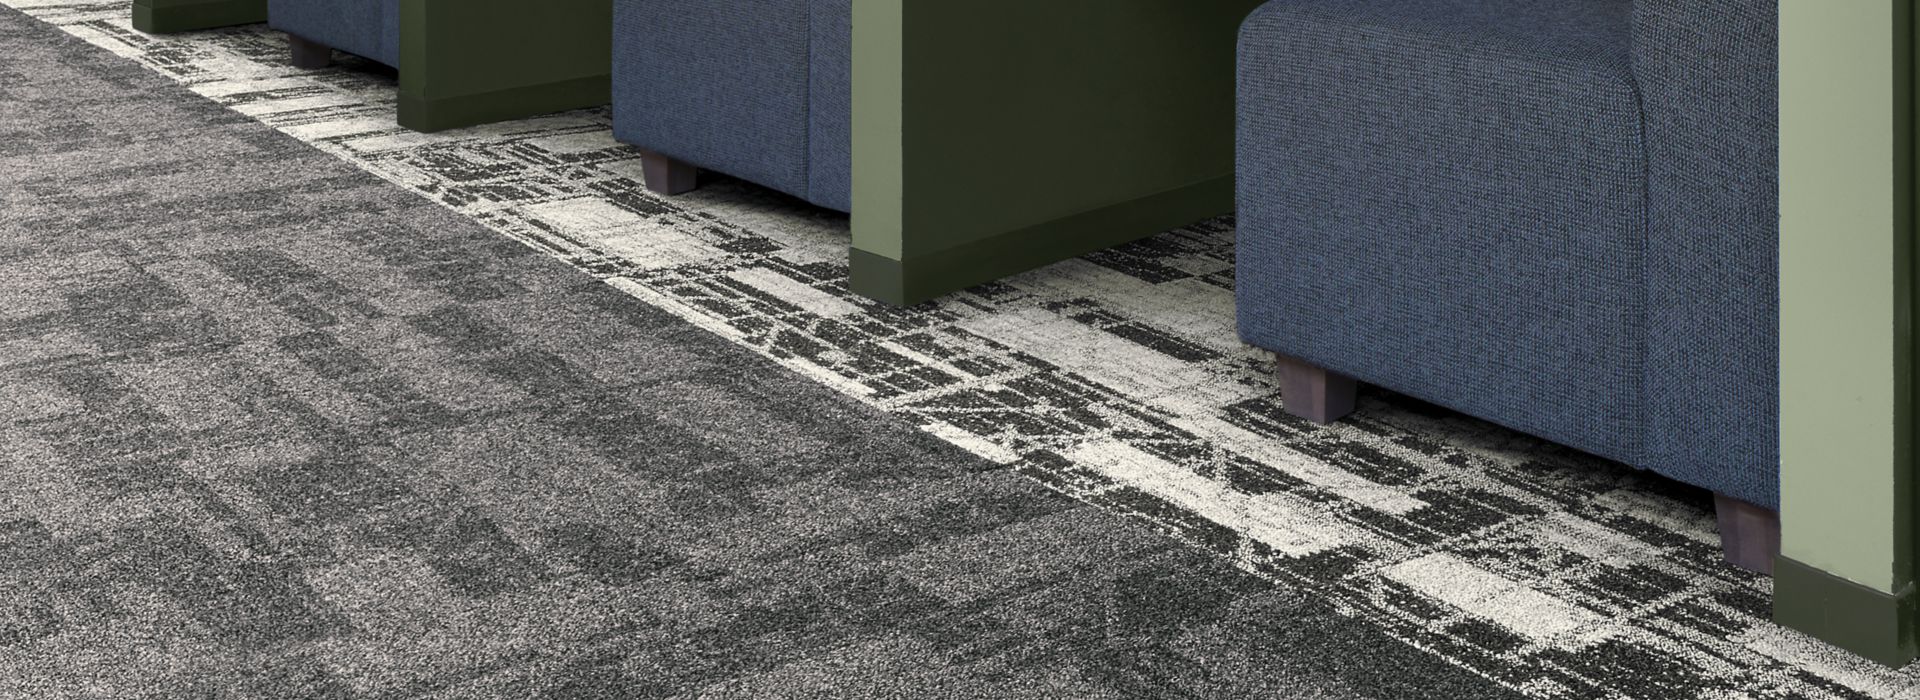 Interface Dynamic Duo carpet tile in private seating areas